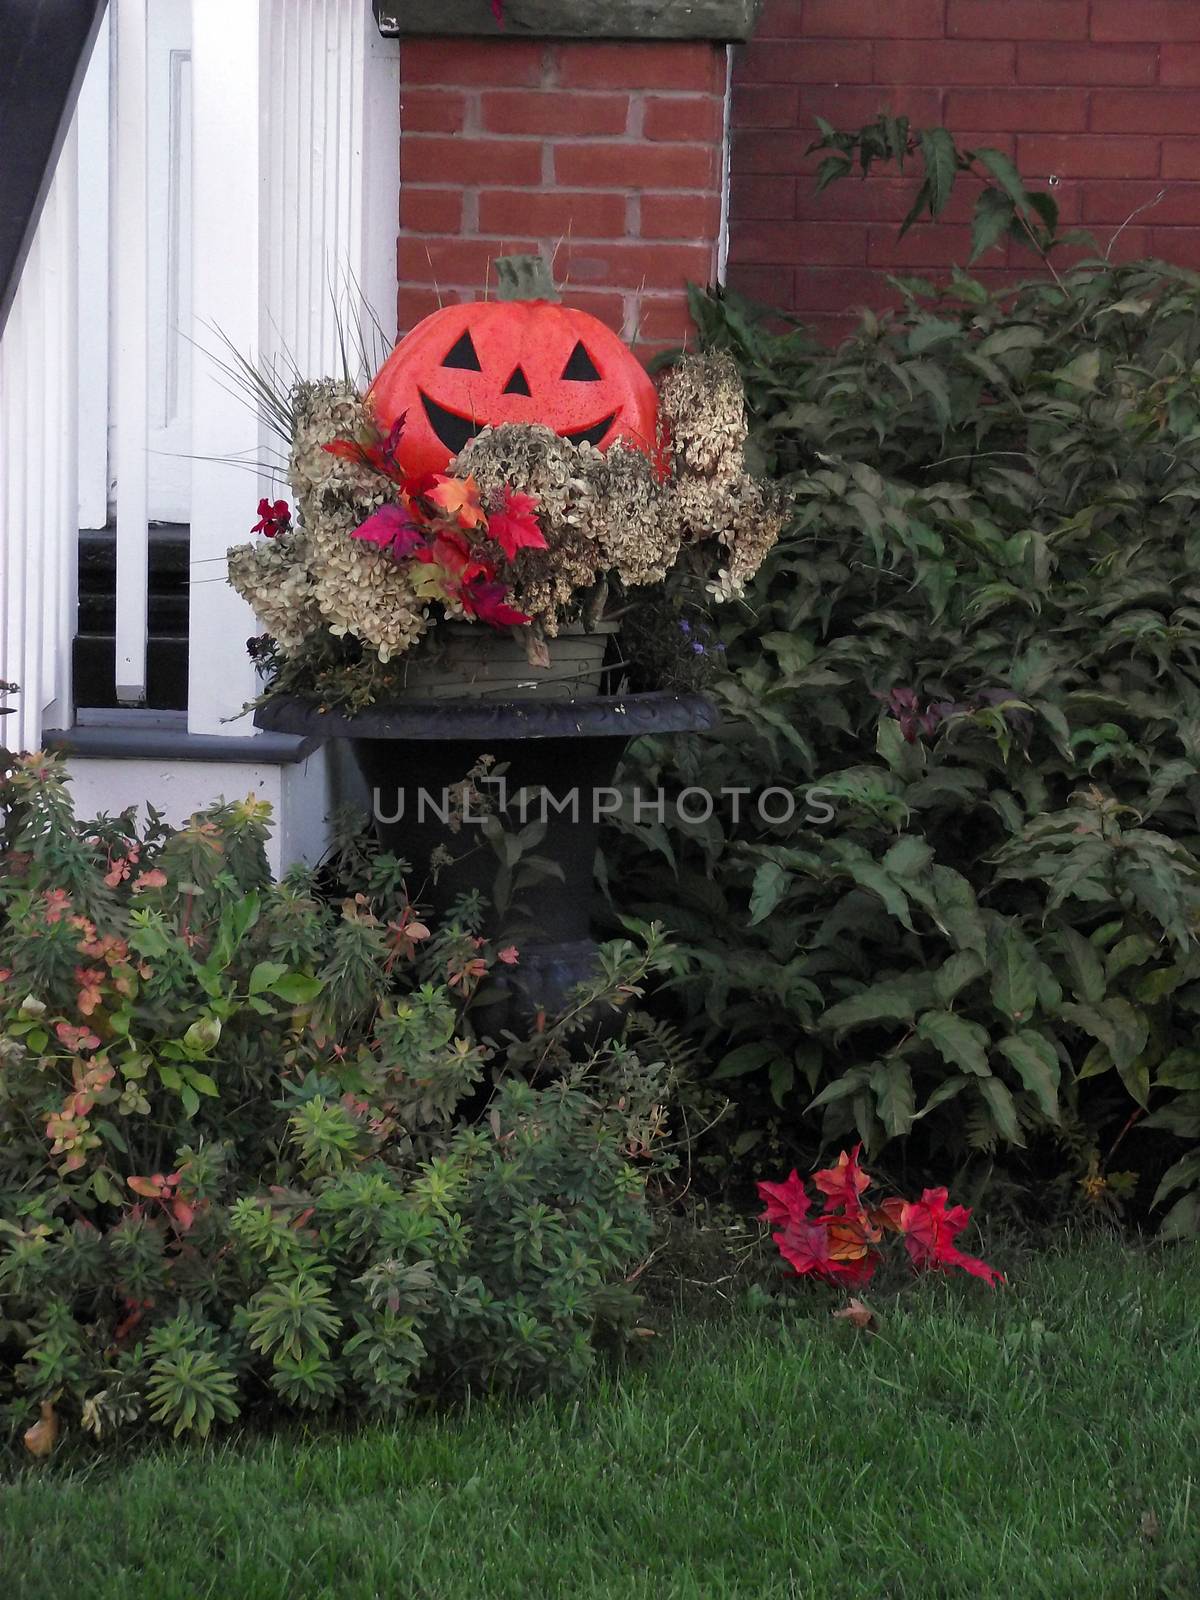 A pumpkin adds a little decor to the season of thanksgiving and Halloween.